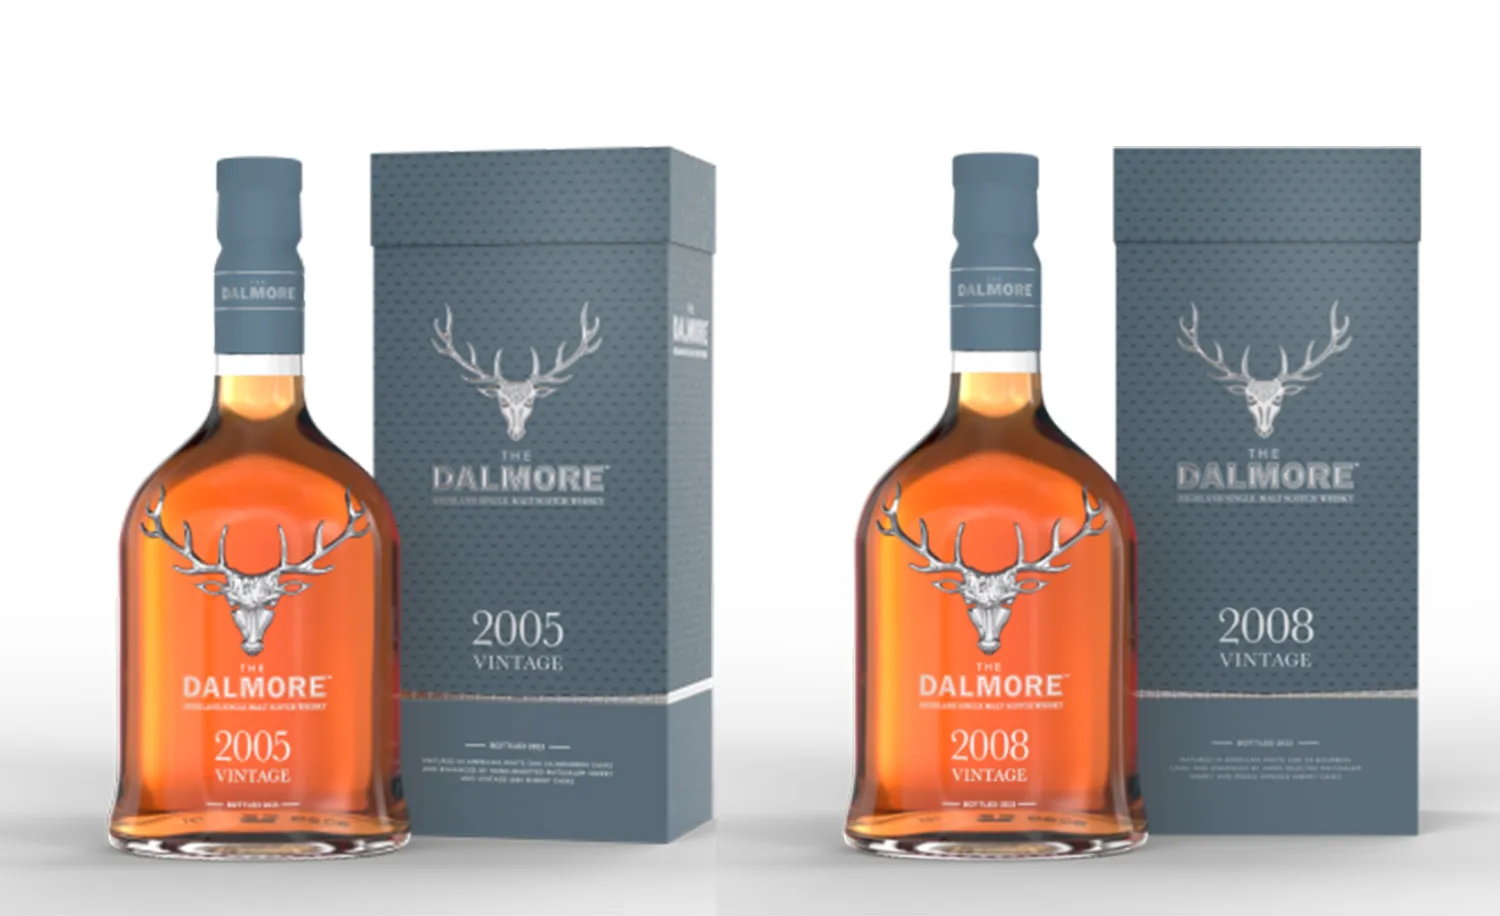 The Dalmore introduces new products in Vintage Collection